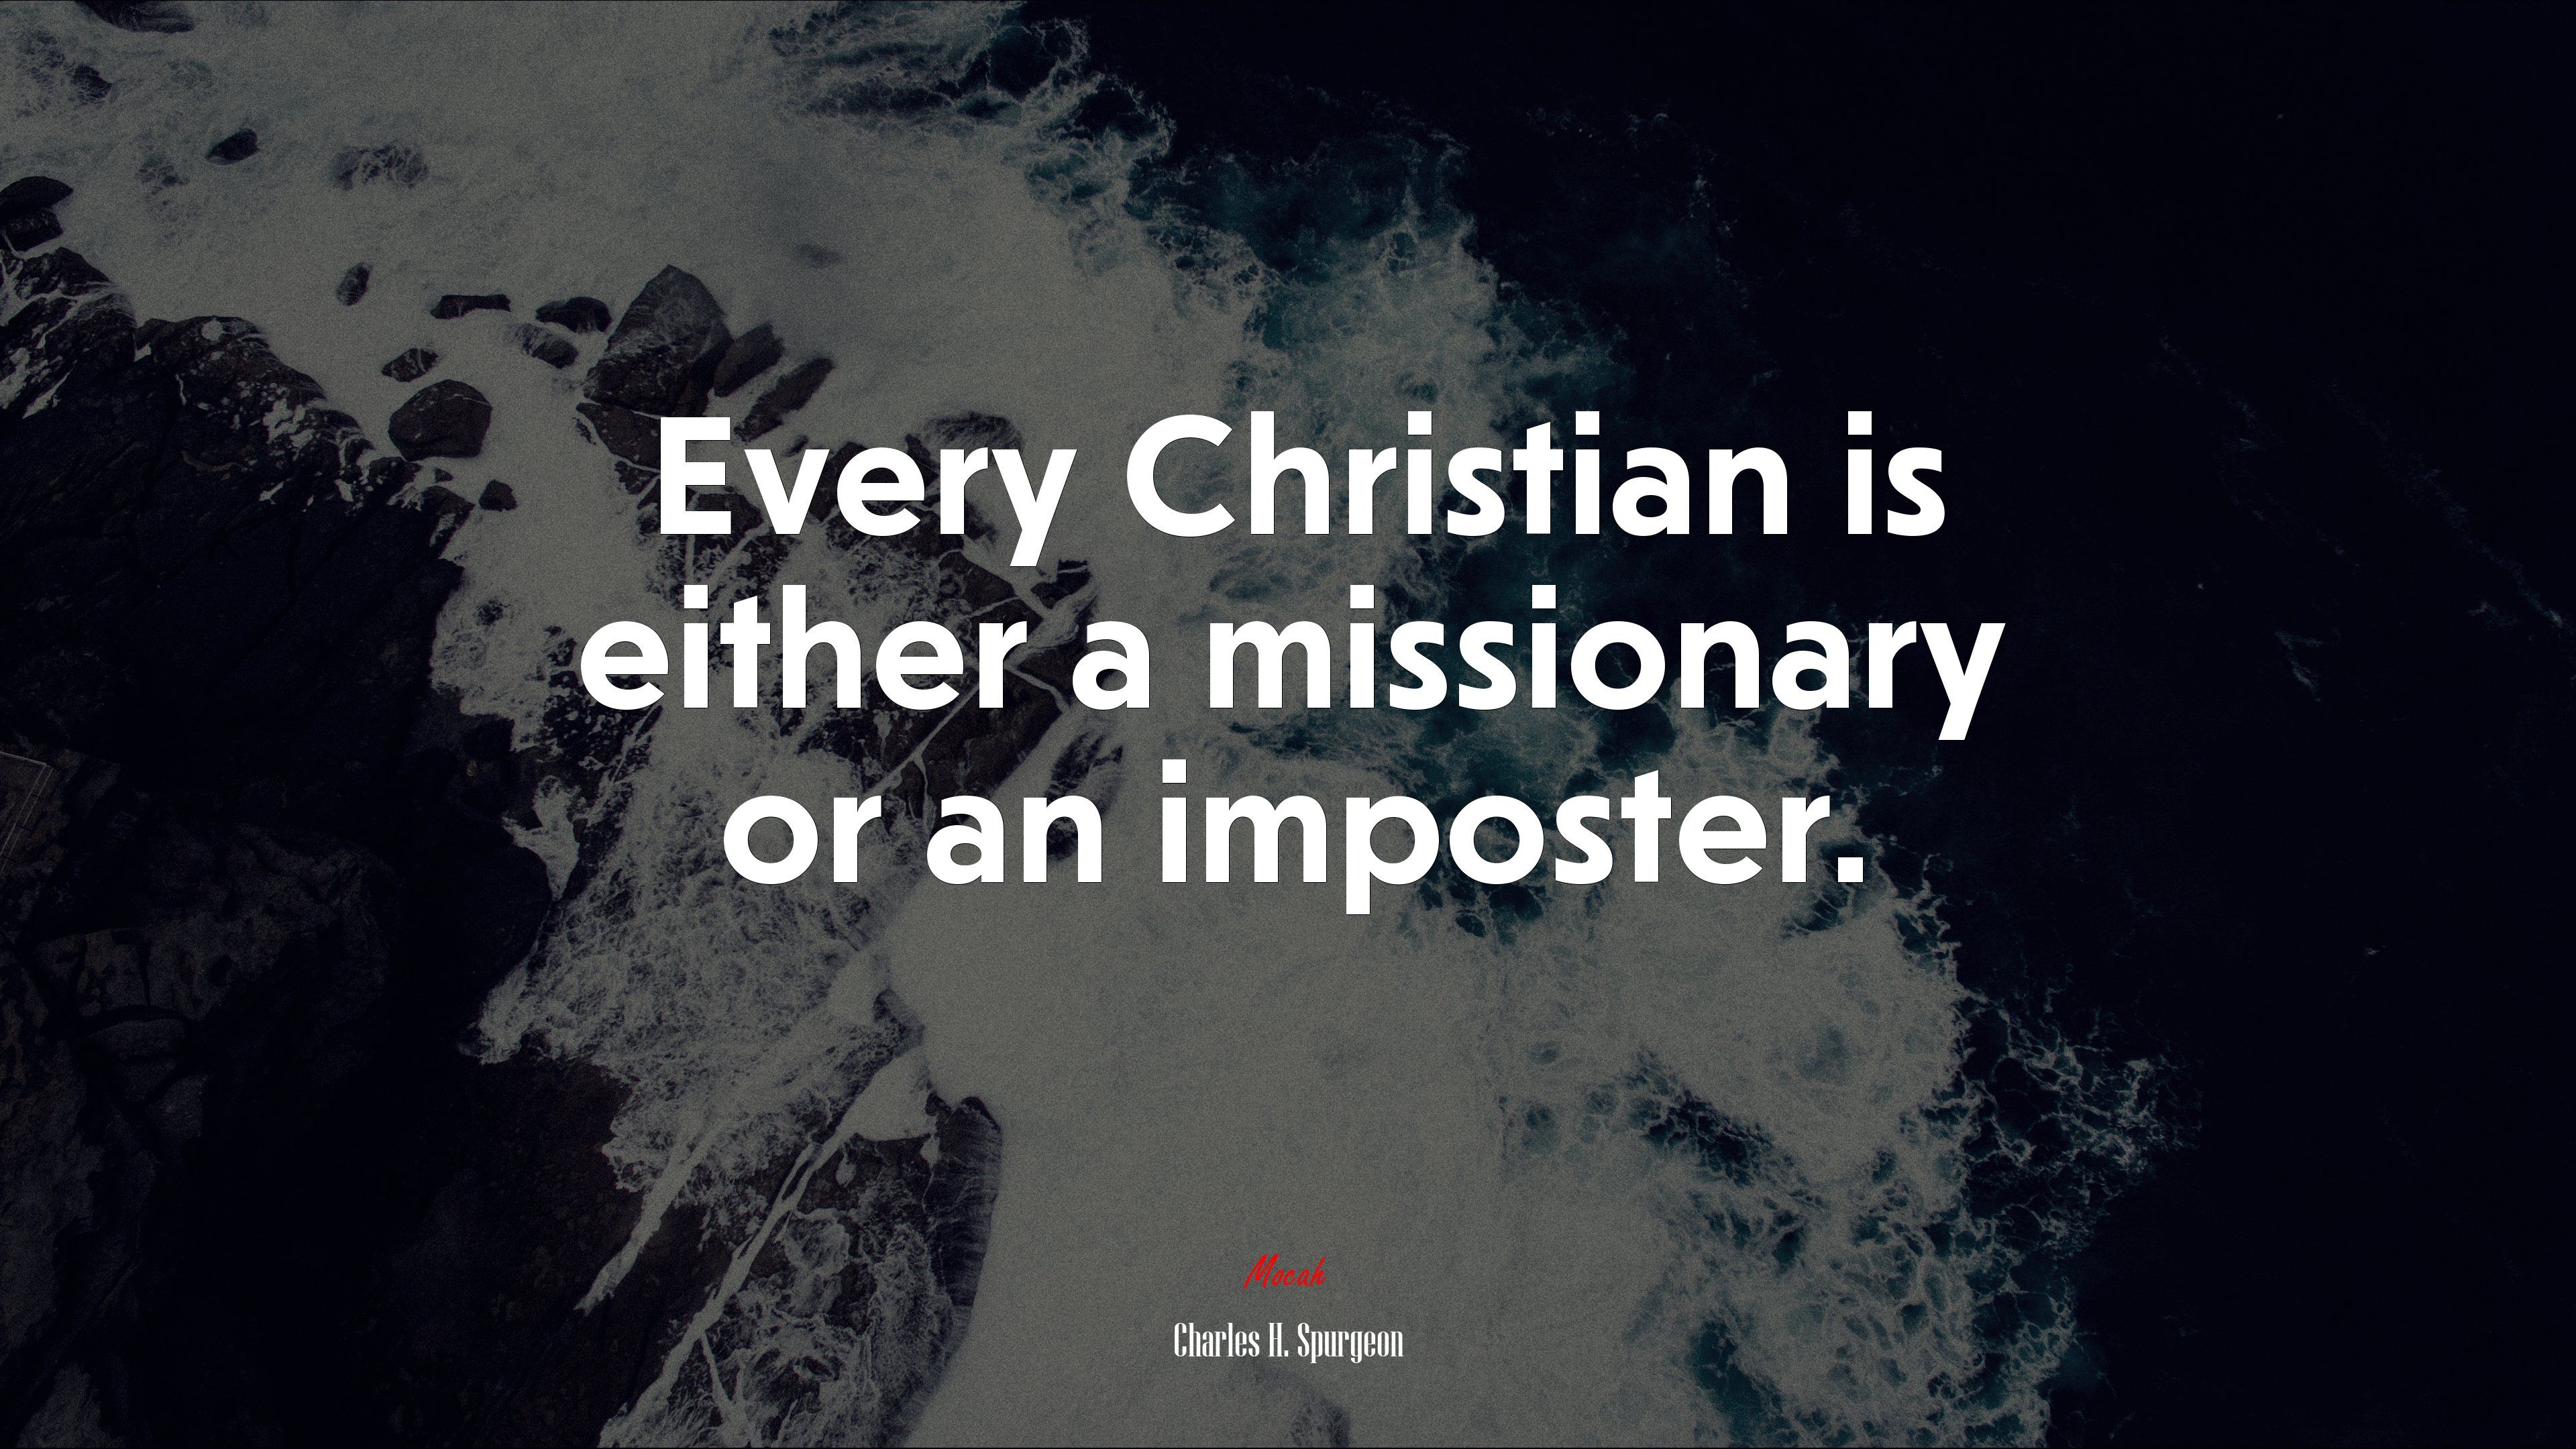 Every Christian is either a missionary or an imposter. Charles H. Spurgeon quote, 4k wallpaper HD Wallpaper